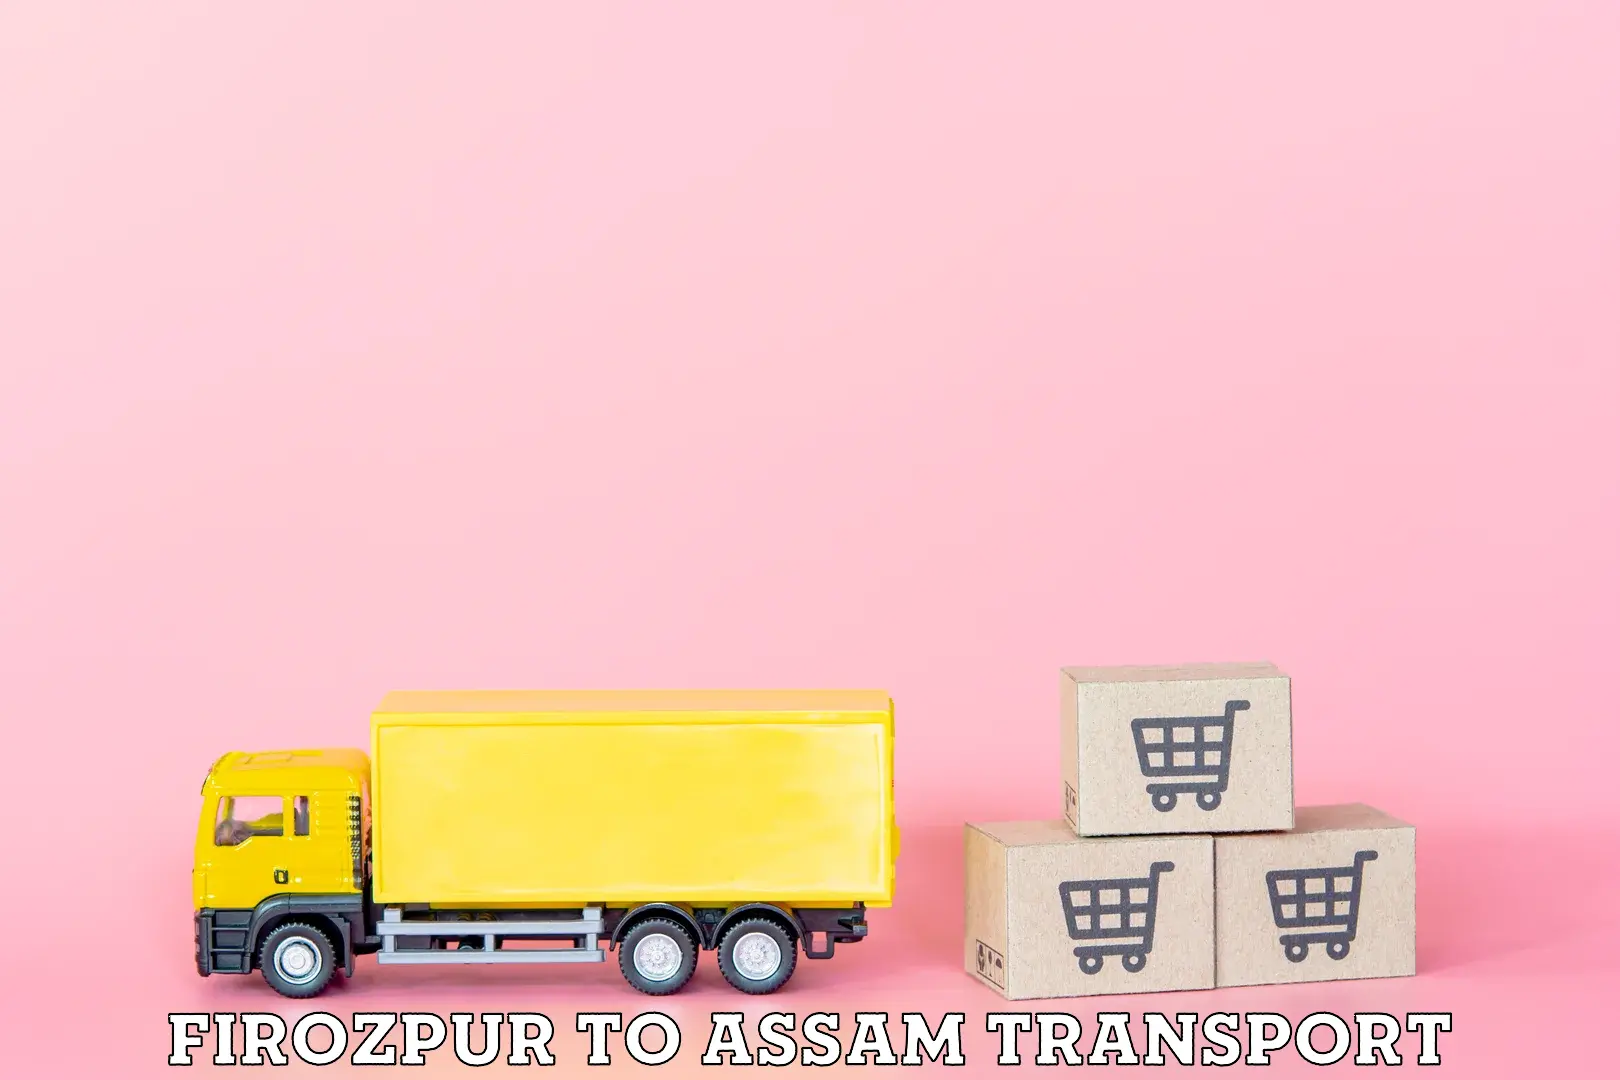 All India transport service Firozpur to Dhemaji